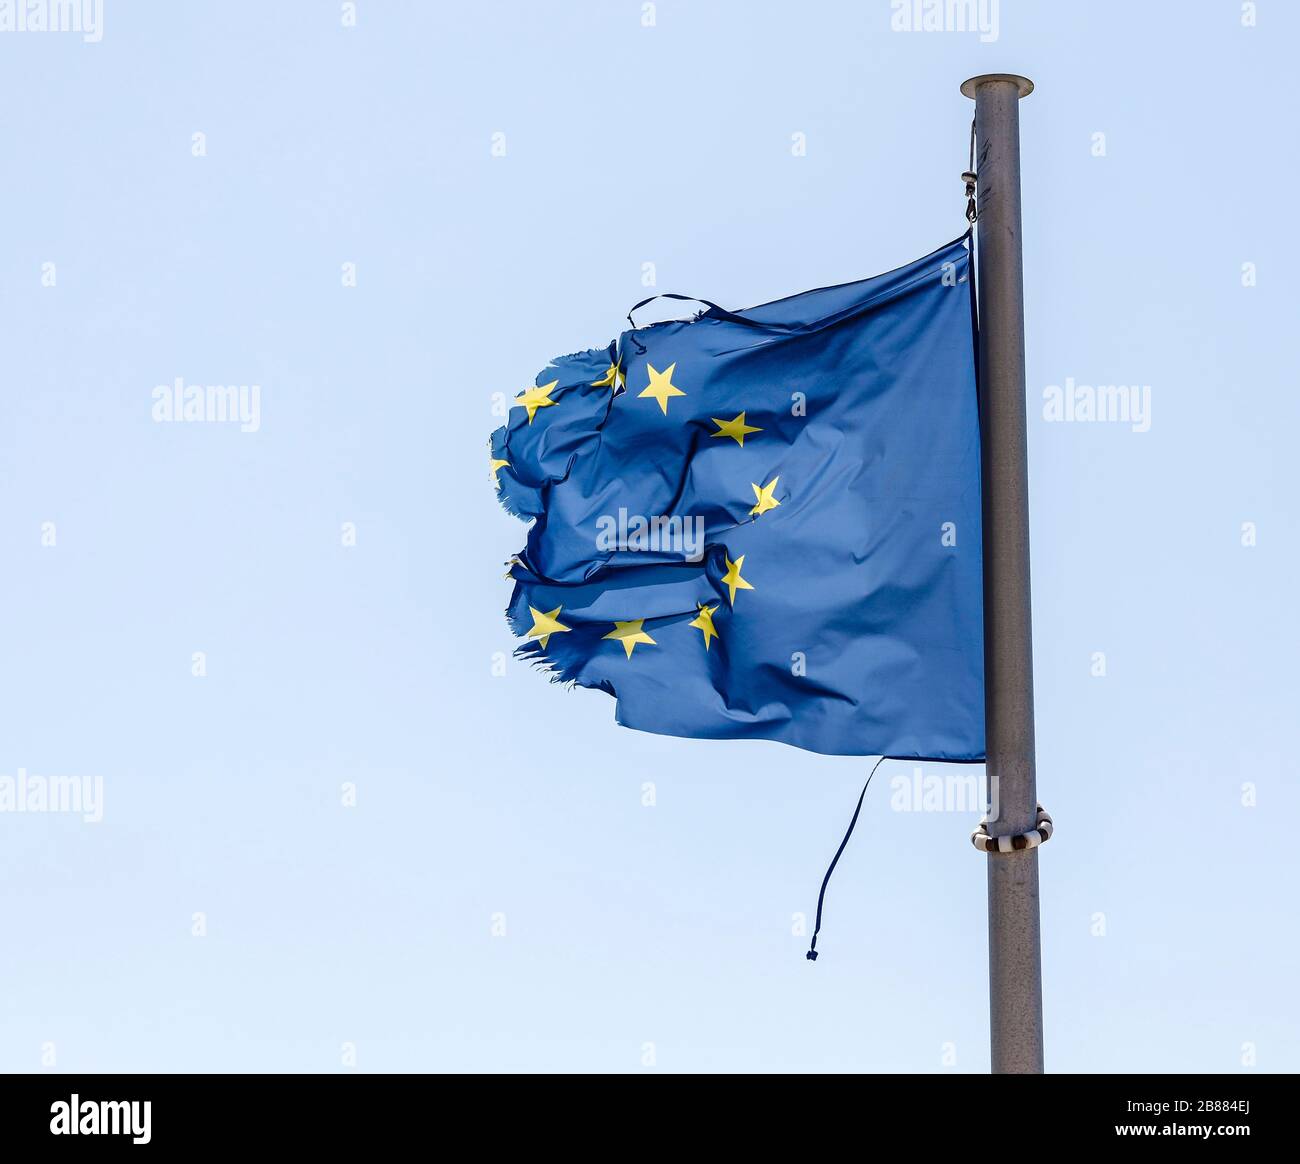 Torn European flag fluttering in the wind at the flagpole, symbolic image of Europe in crisis, Germany Stock Photo